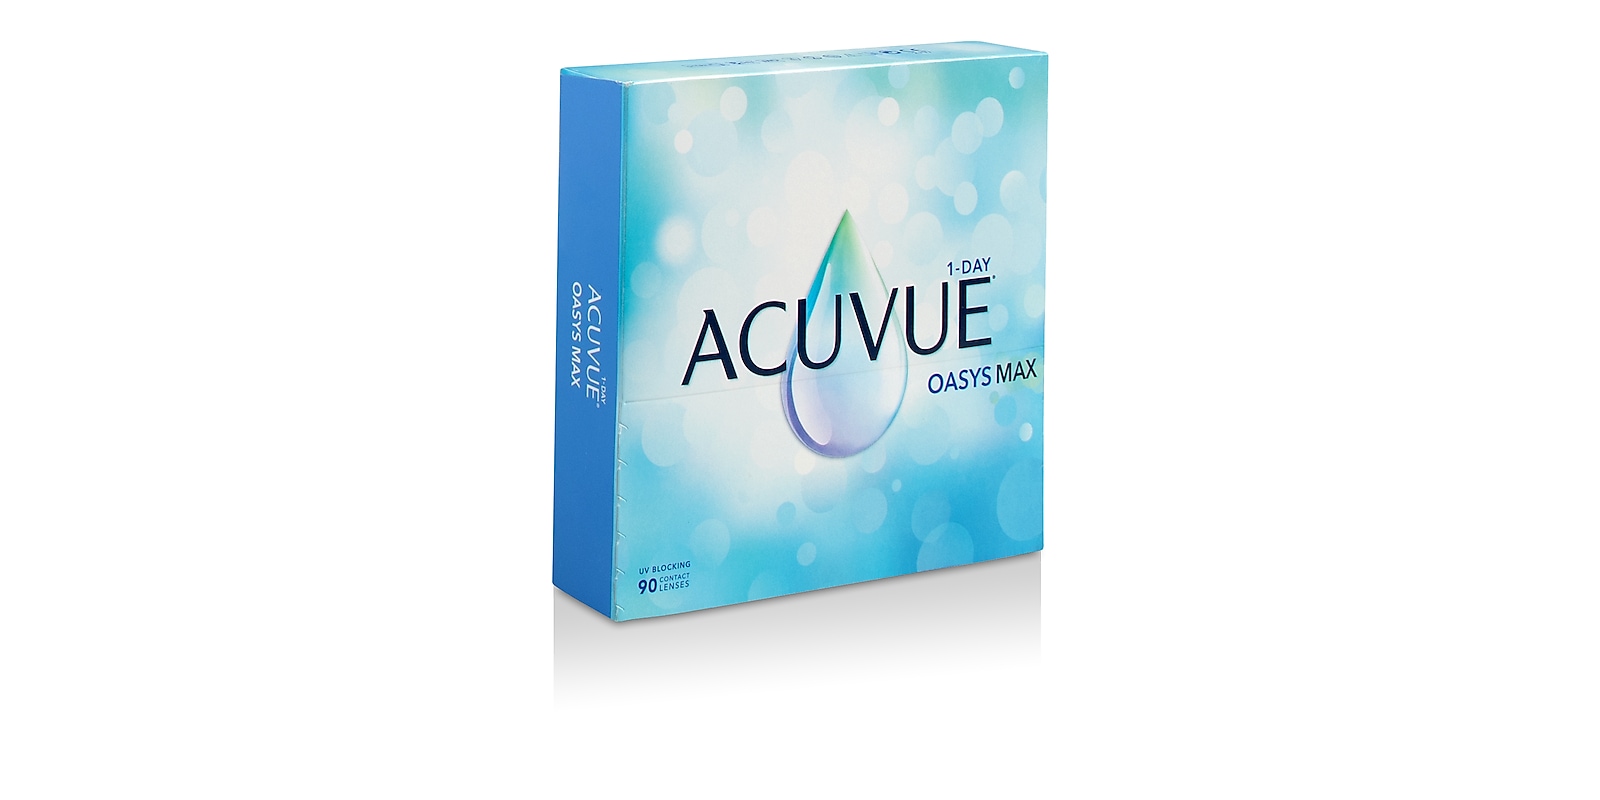 ACUVUE® OASYS MAX 1-Day, 90 pack contact lenses